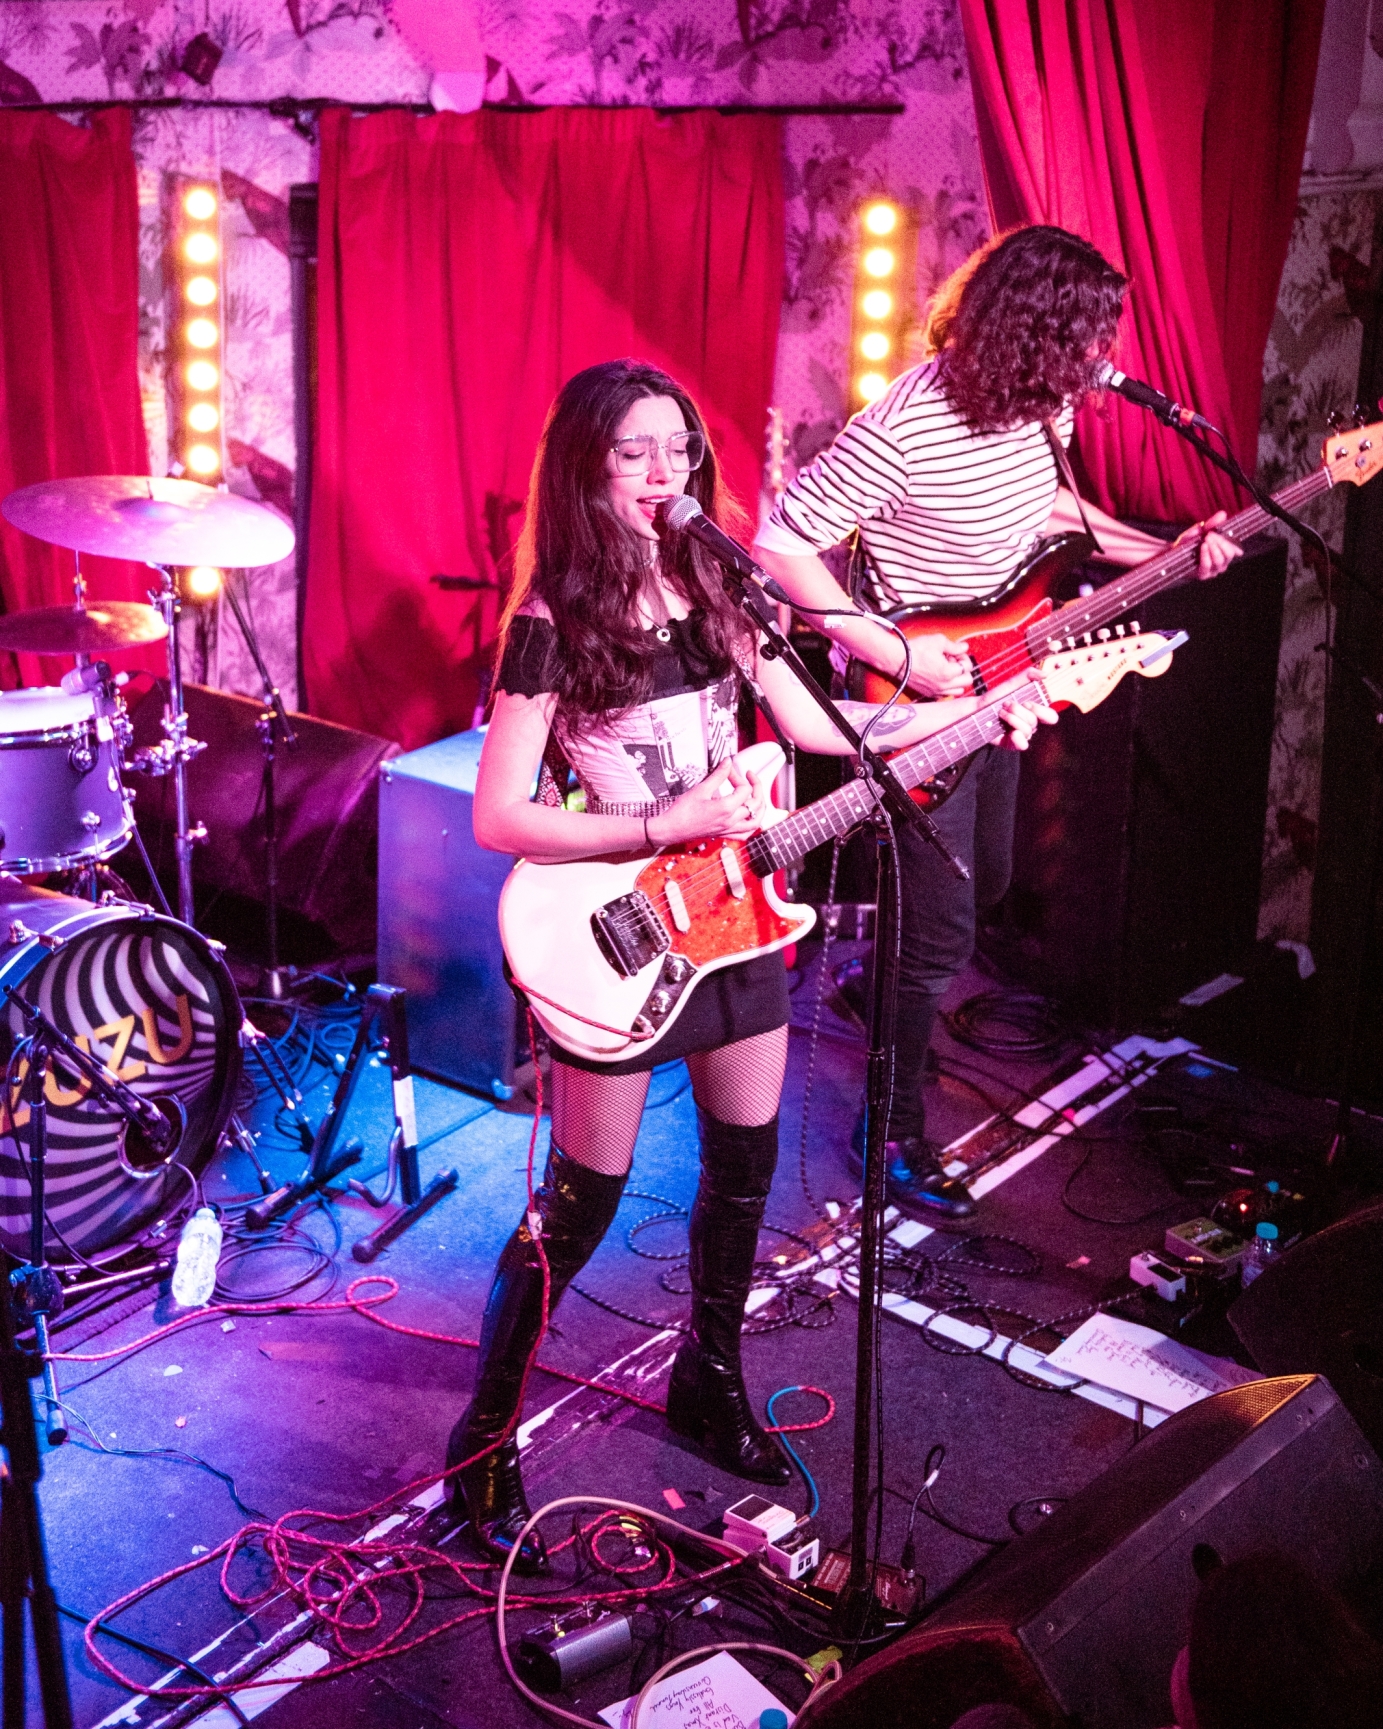 Zuzu performing live at Deaf Institute in Manchester. Live music photography by Abbie Jennings